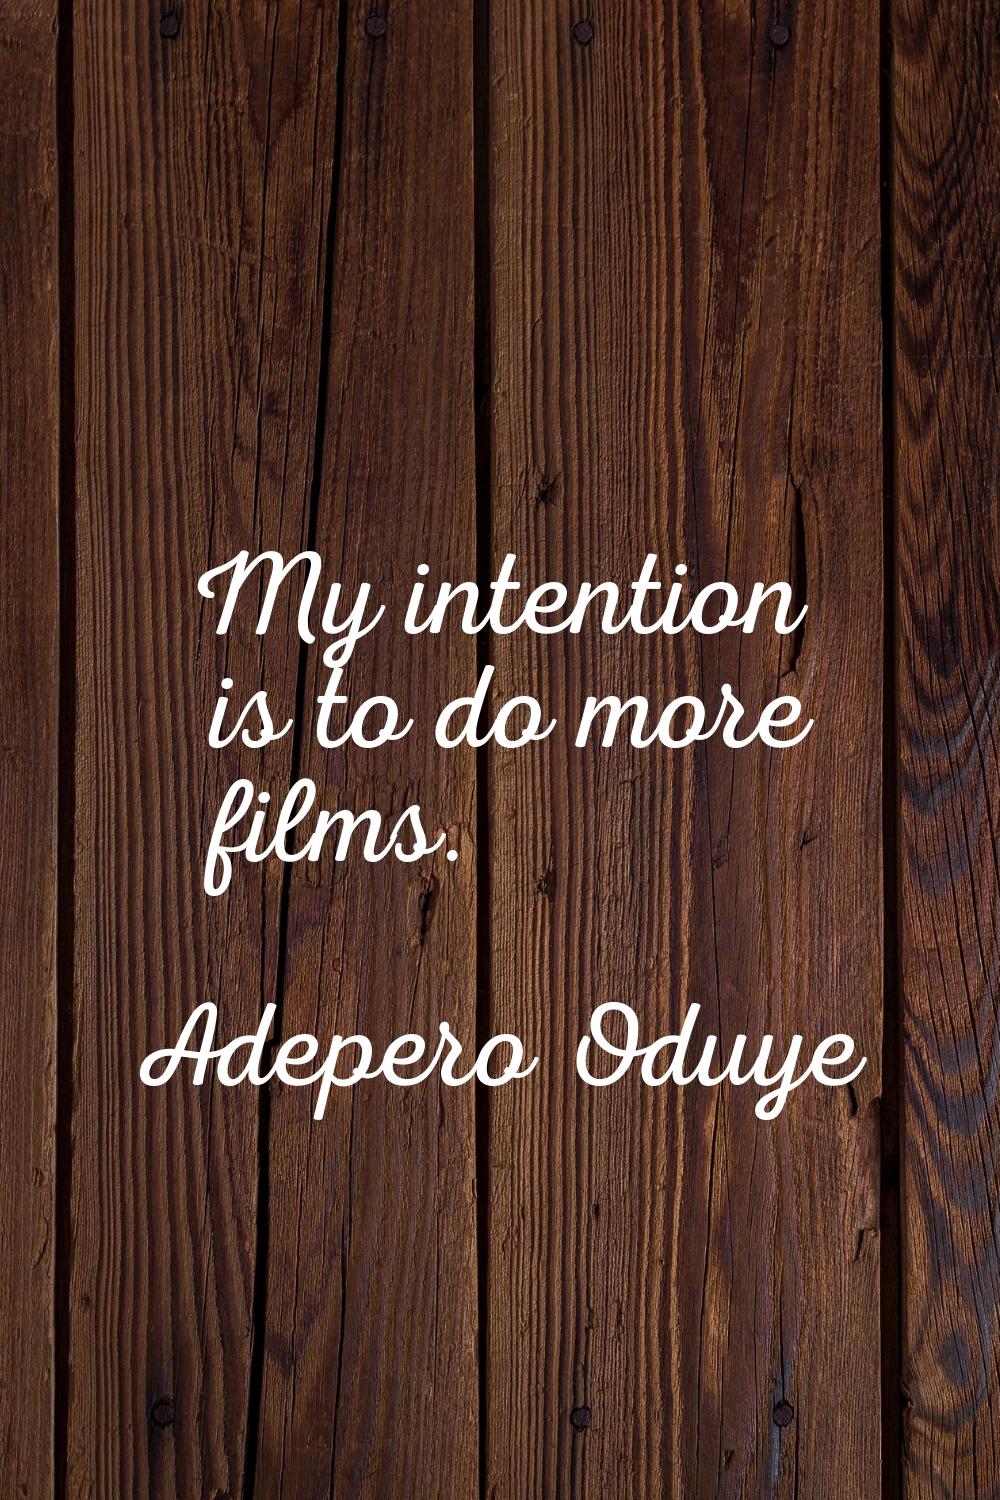 My intention is to do more films.